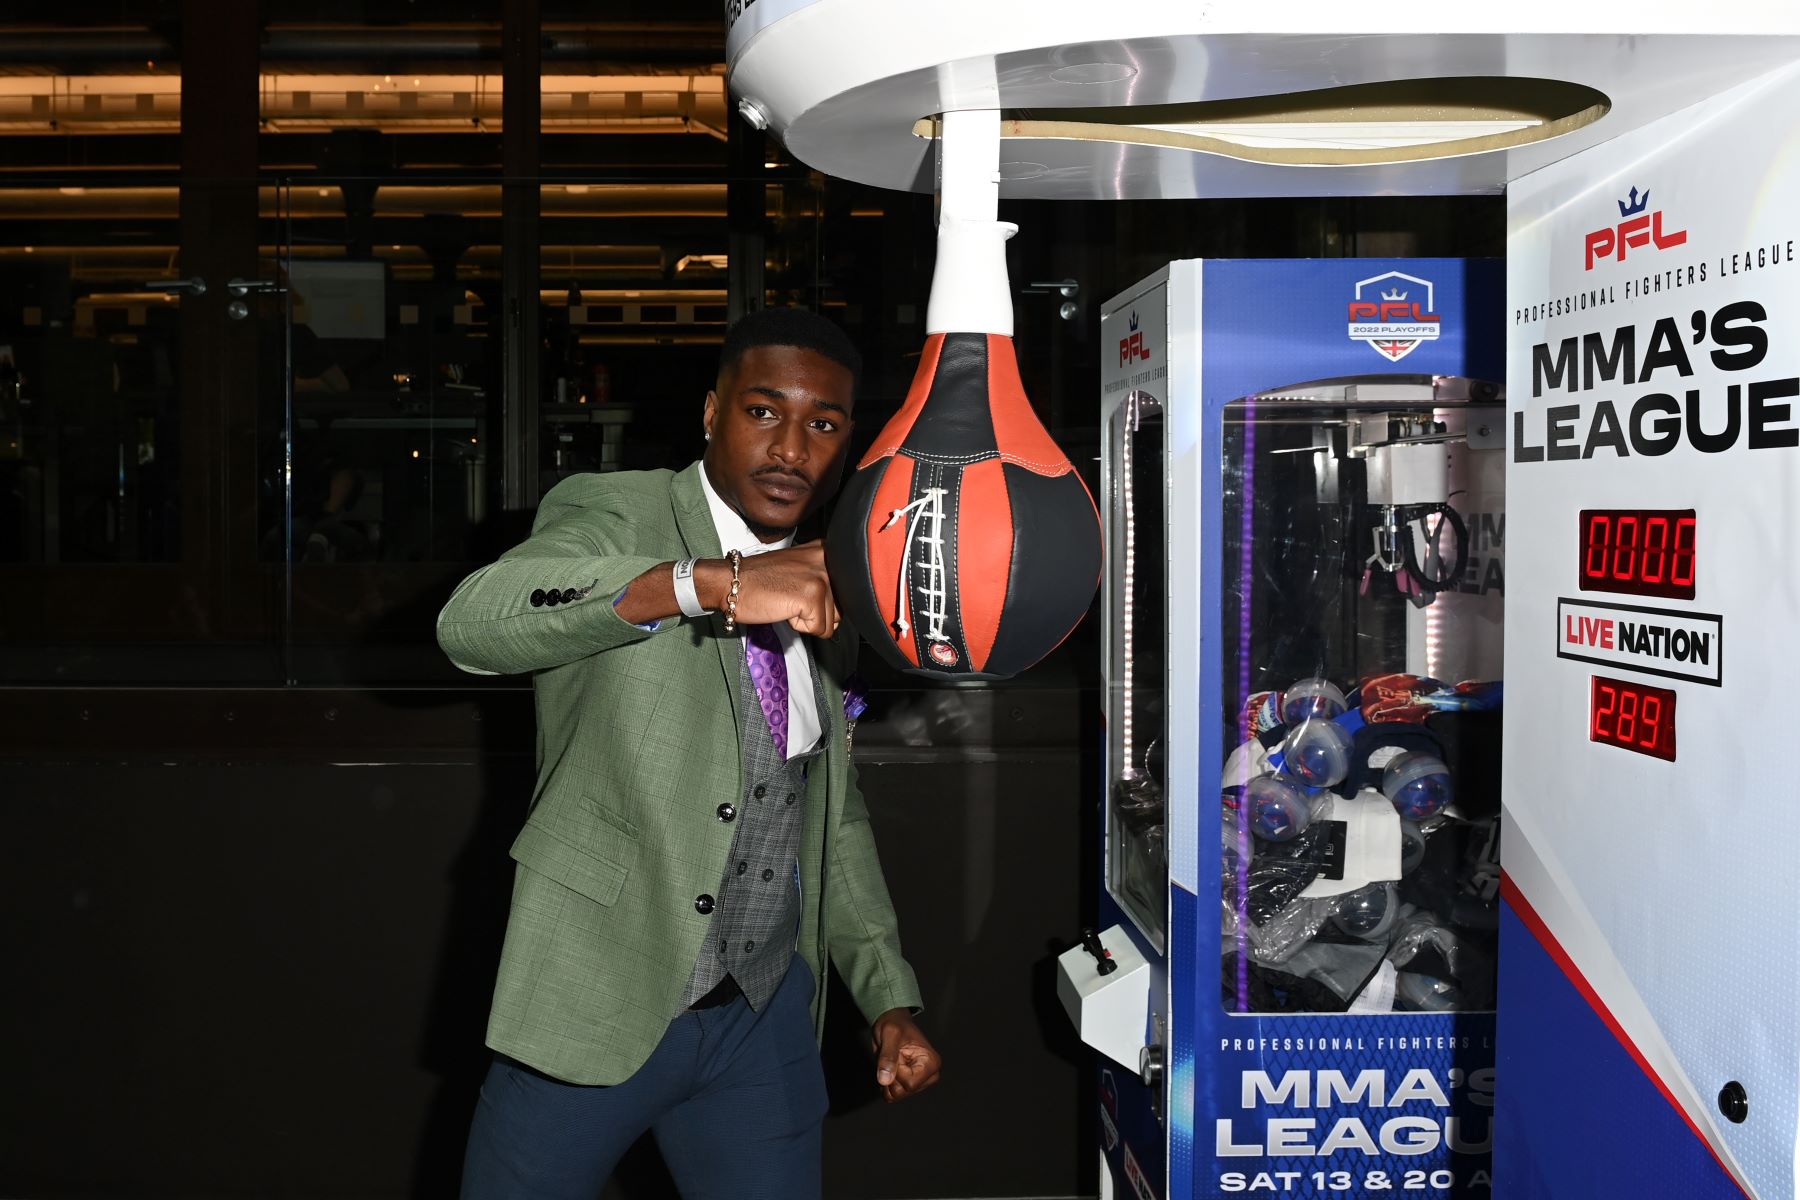 Idris Virgo pictured during a Professional Fighters League (PFL) media event at Live Nation in London, England